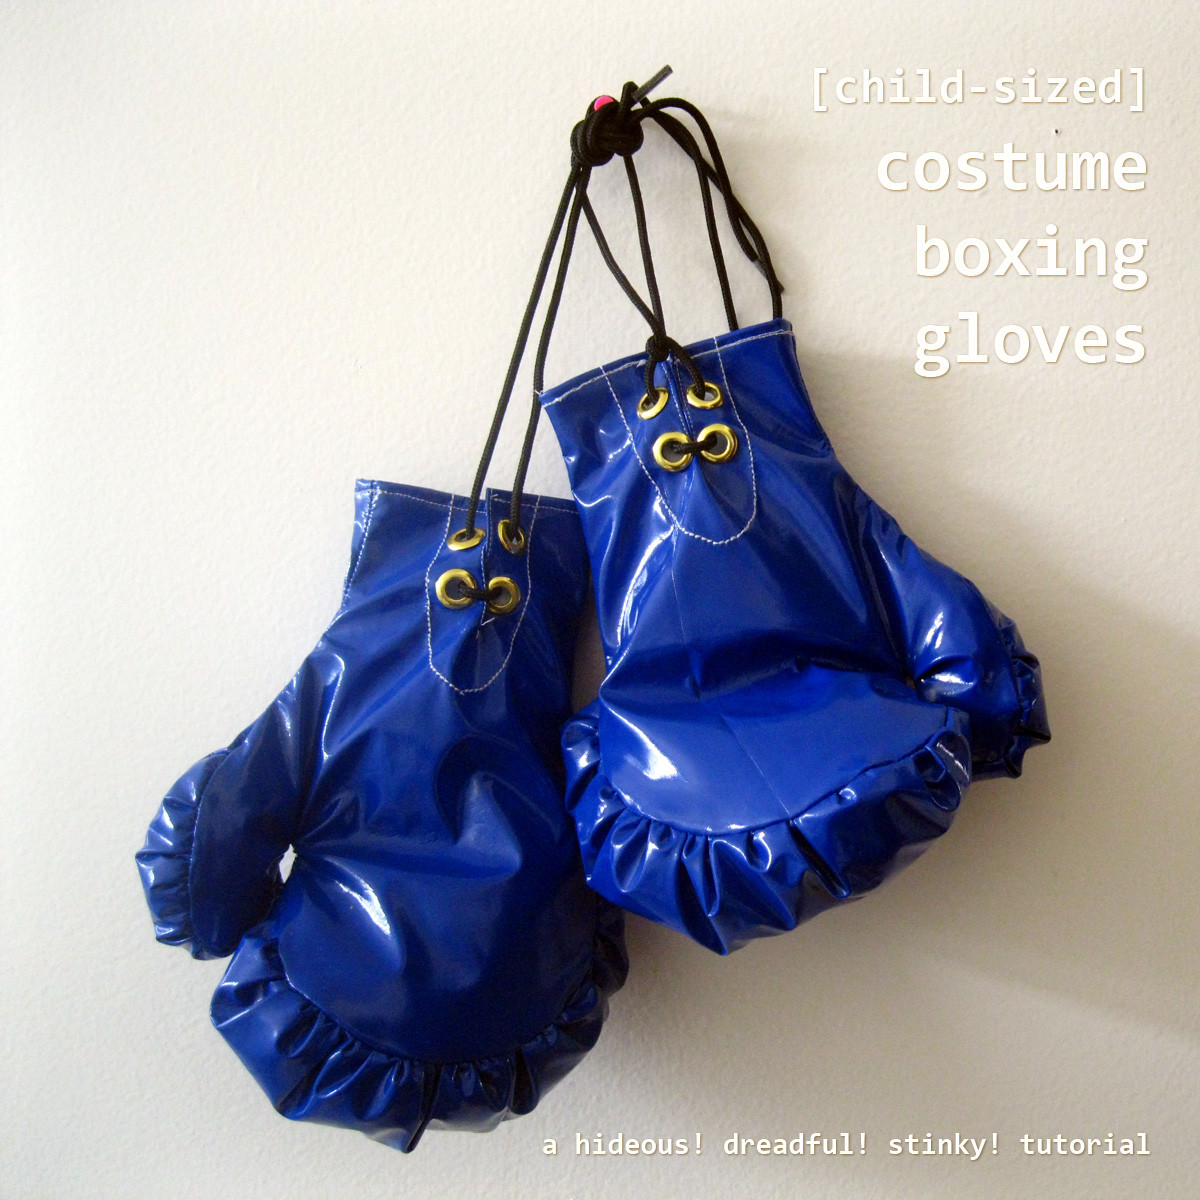 DIY Boxing Gloves
 Child Sized Costume Boxing Gloves Tutorial Hideous